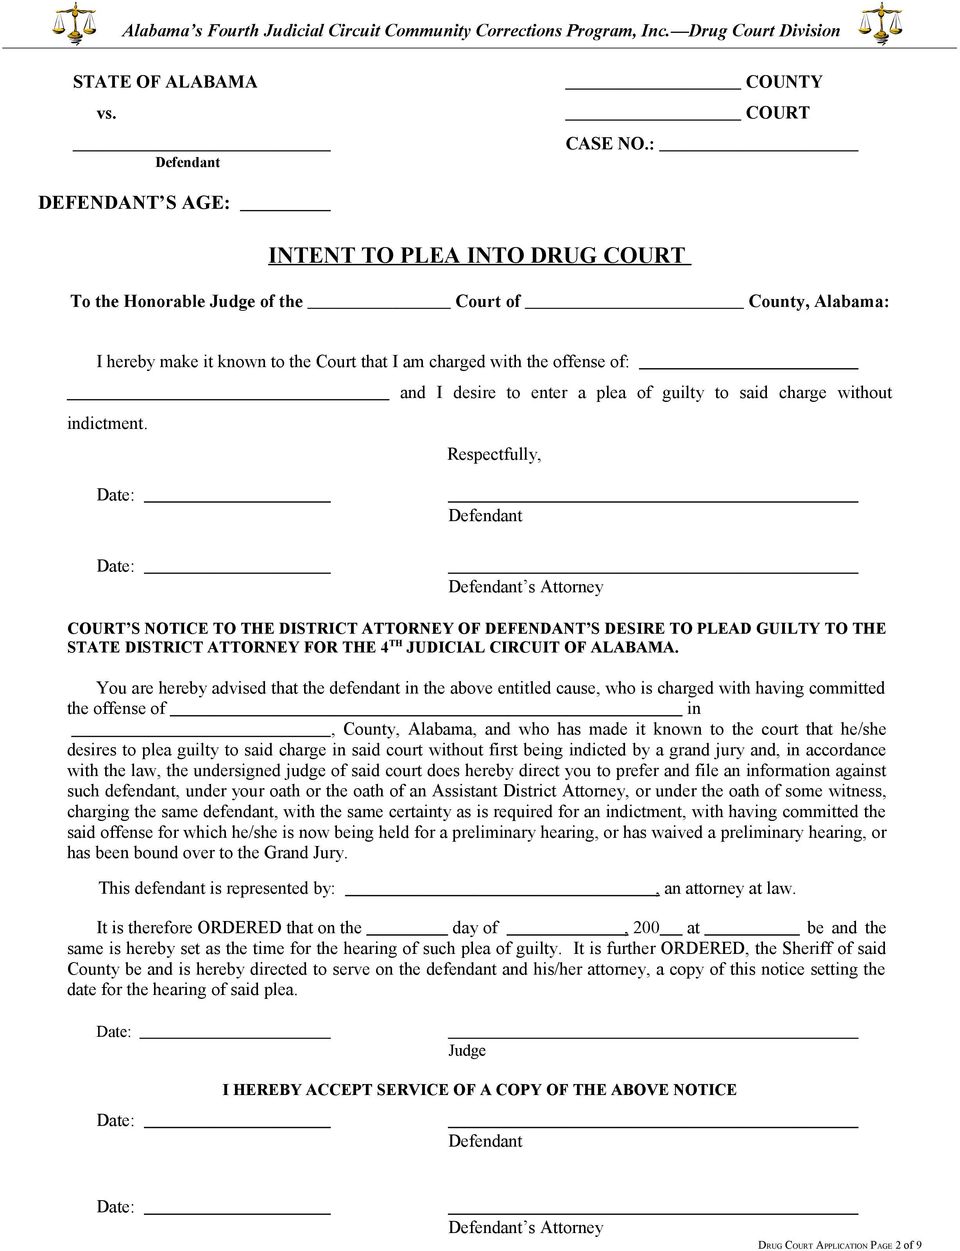 Respectfully, s Attorney COURT S NOTICE TO THE DISTRICT ATTORNEY OF DEFENDANT S DESIRE TO PLEAD GUILTY TO THE STATE DISTRICT ATTORNEY FOR THE 4 TH JUDICIAL CIRCUIT OF ALABAMA.